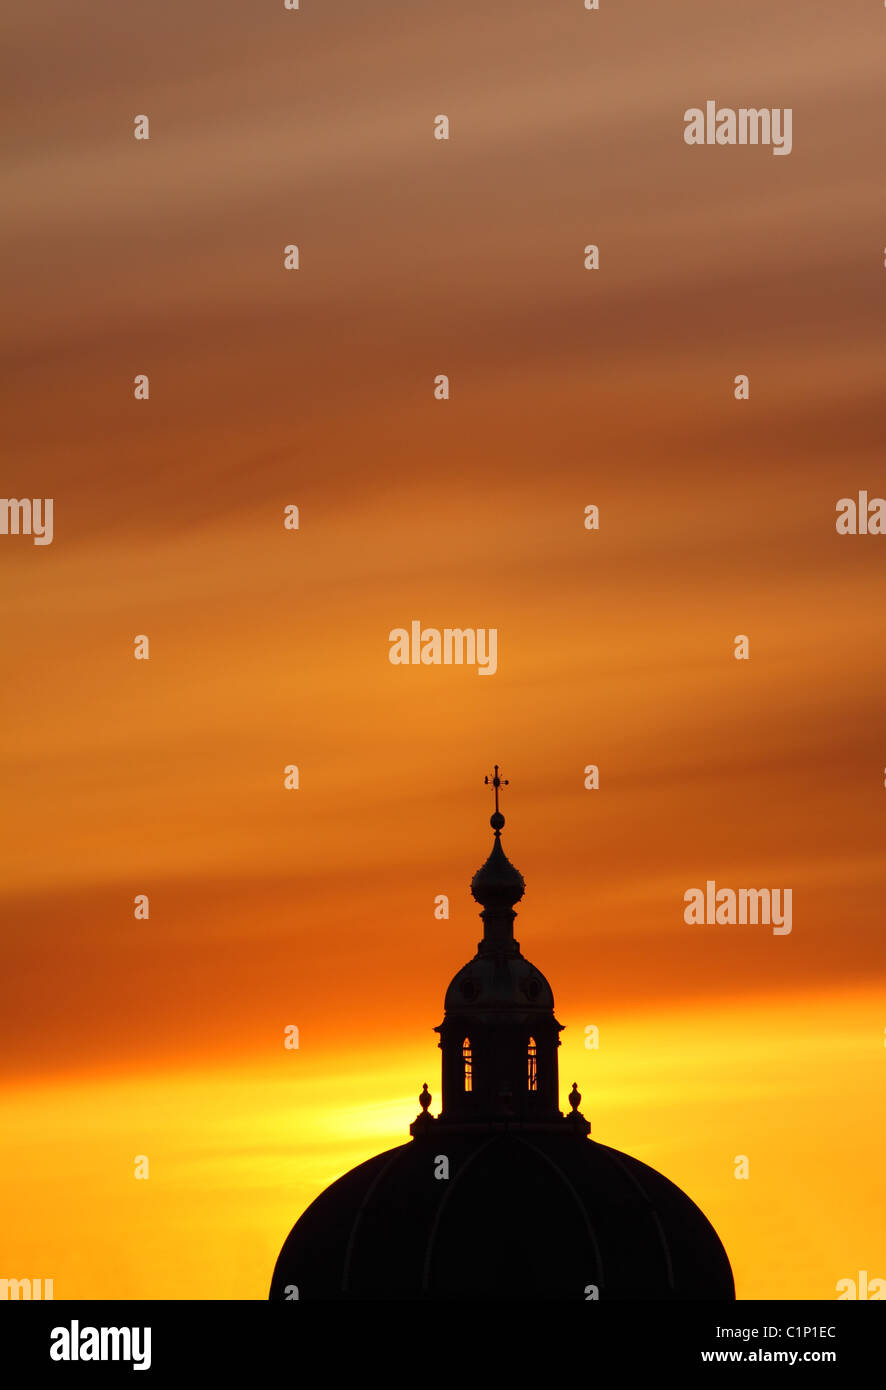 Dome of a cathedral of the Peter and Paul Fortress Stock Photo